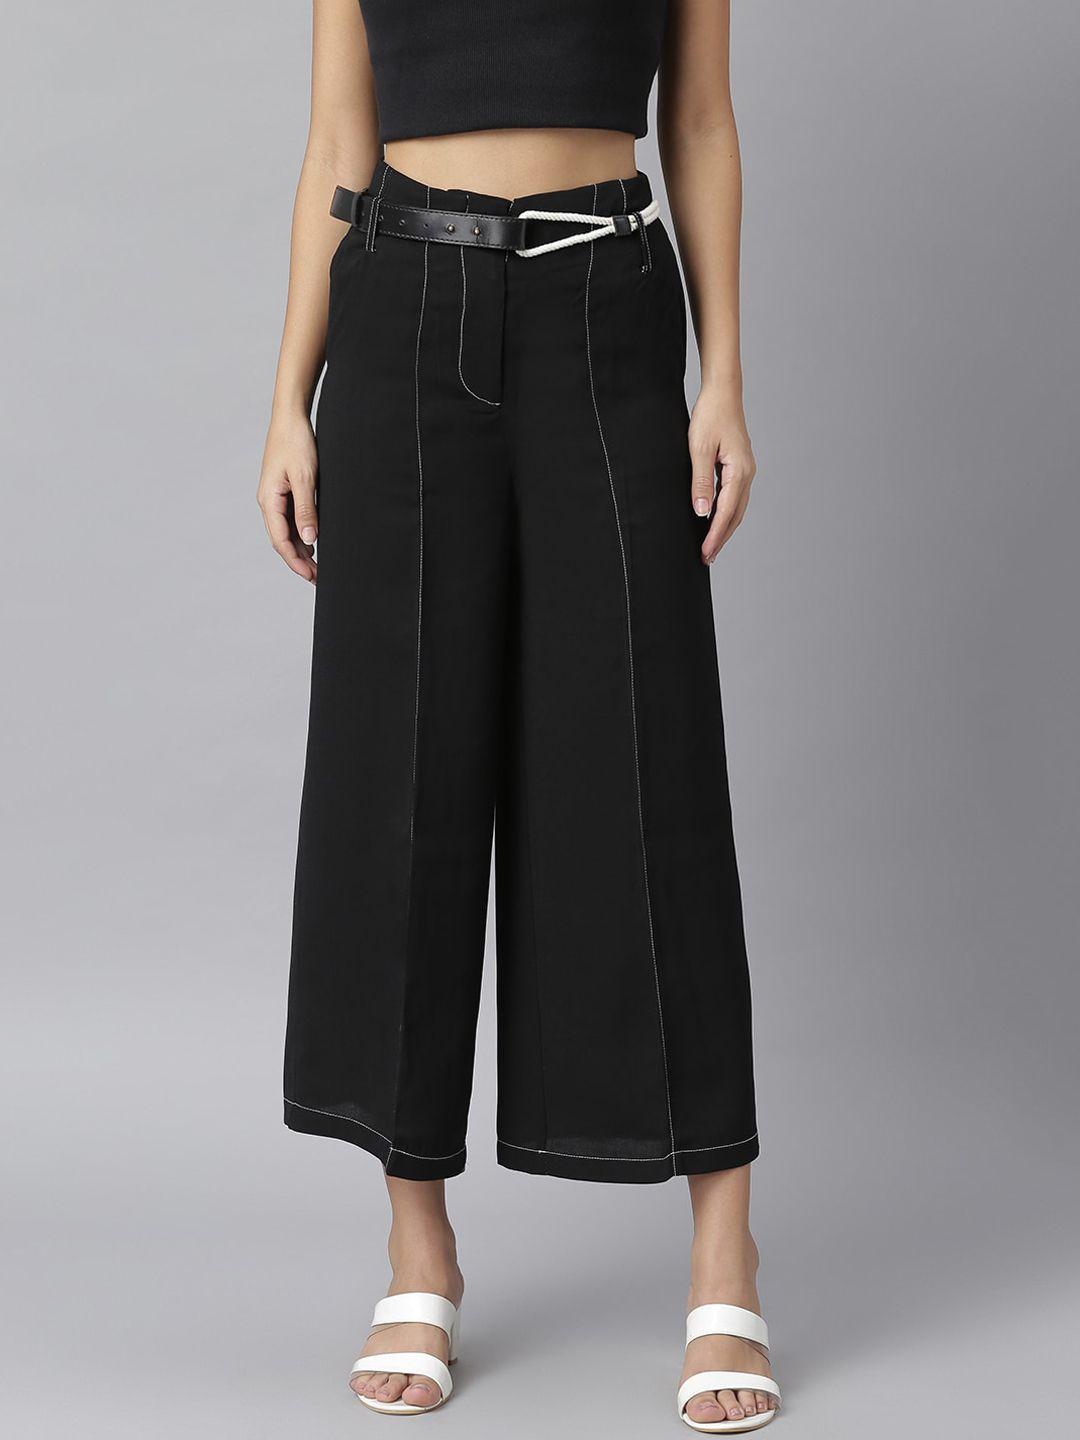 kassually women black culottes trousers